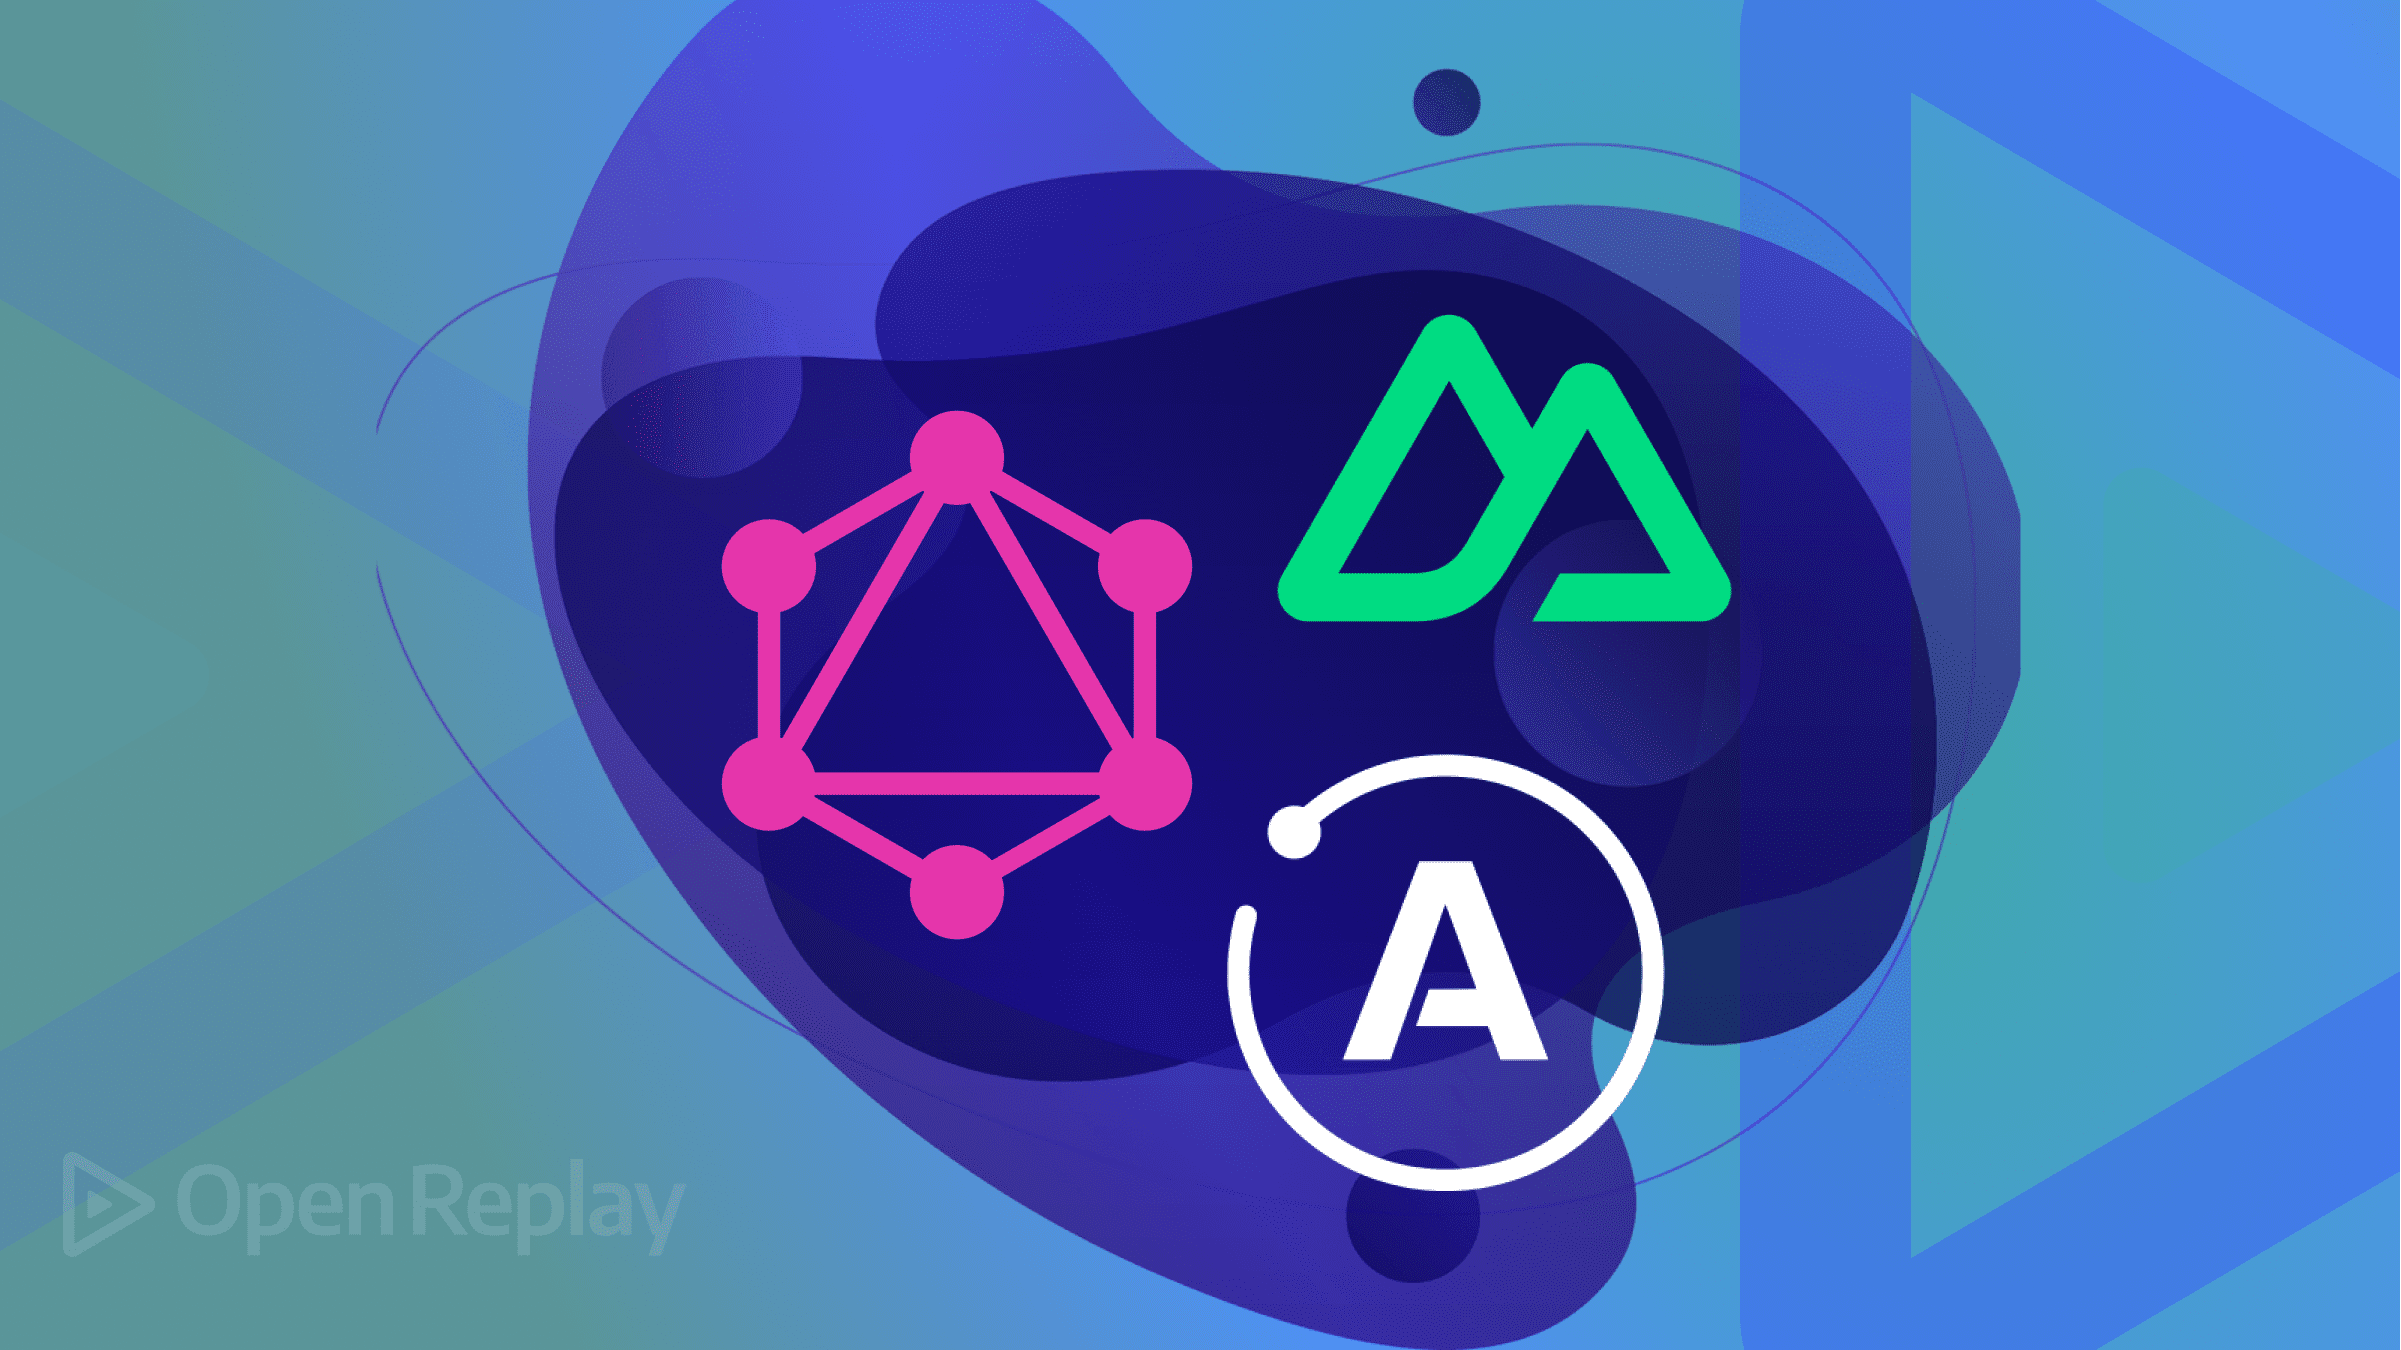 Integrating GraphQL into Nuxt apps with Nuxt Apollo